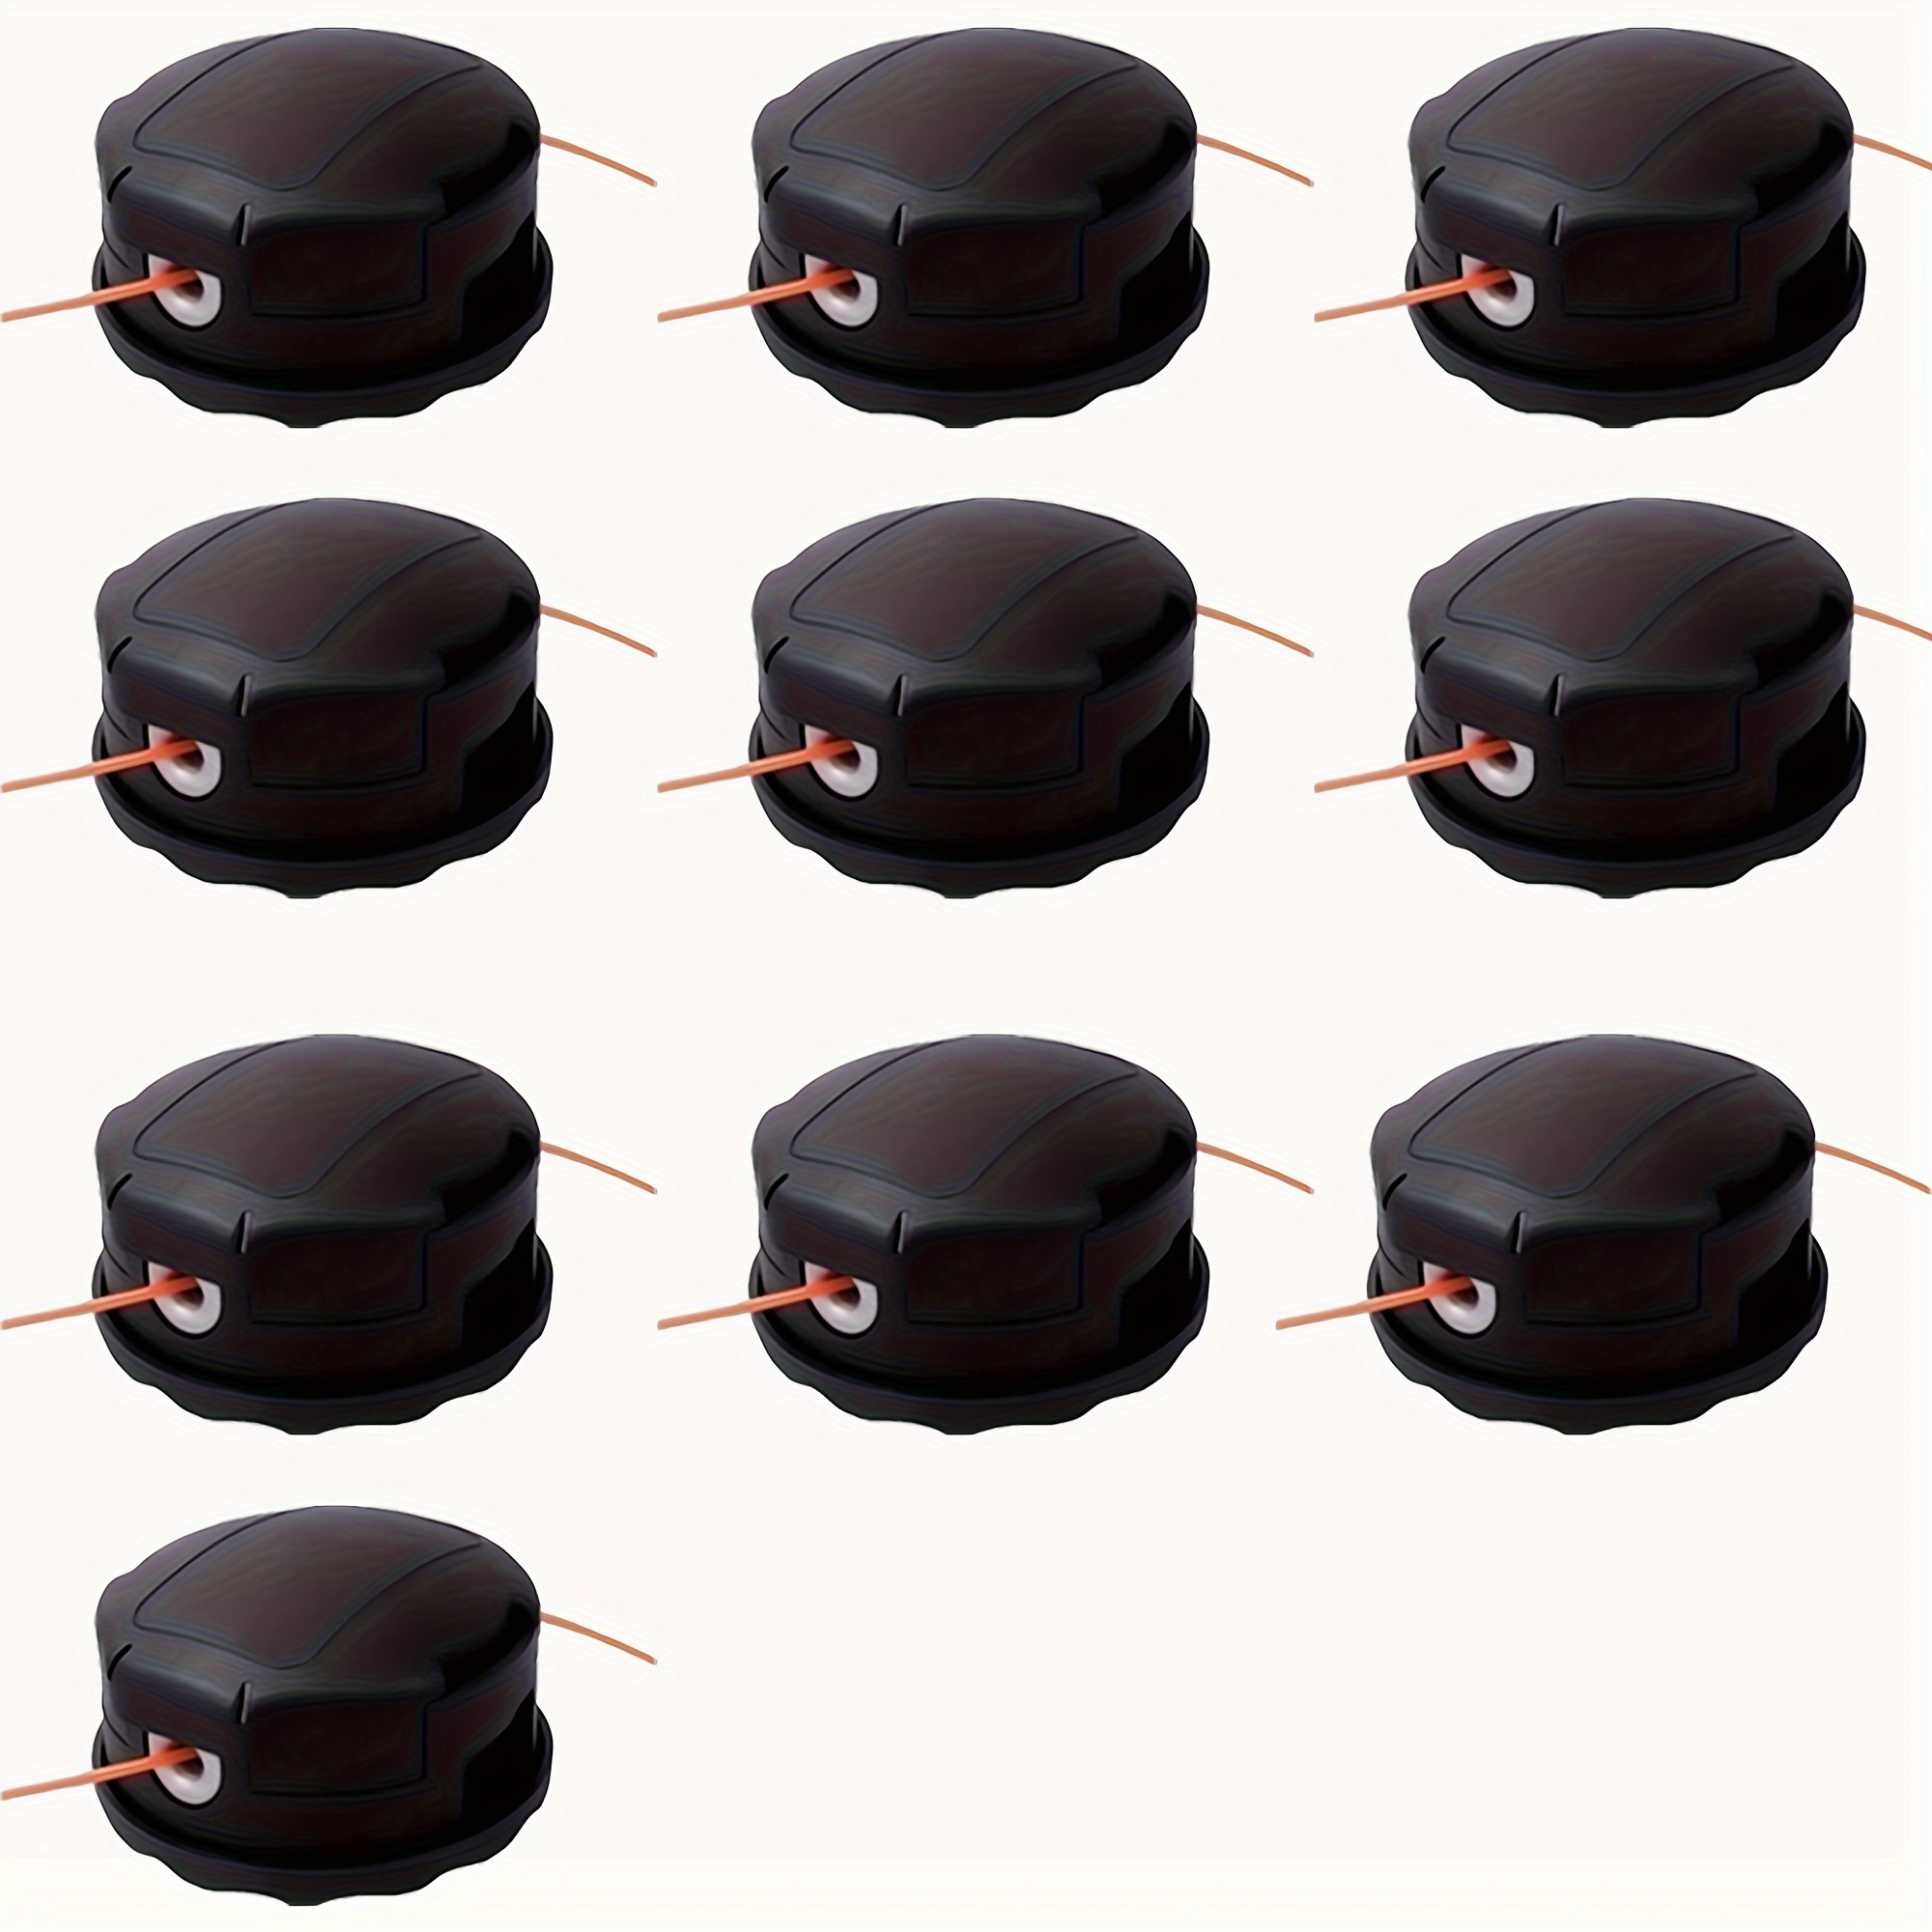 

10pcs String Trimmer Head Srm-225 For Echo Eater Speed-feed 400 Srm-230 Srm-210 Srm2100 Srm225 Pas210 Pas225 Pas230 Pas260 Shiandaiwa T195s T220 T222 T230 T231 Fit Most Echo Srm Straight Axle Trimmer